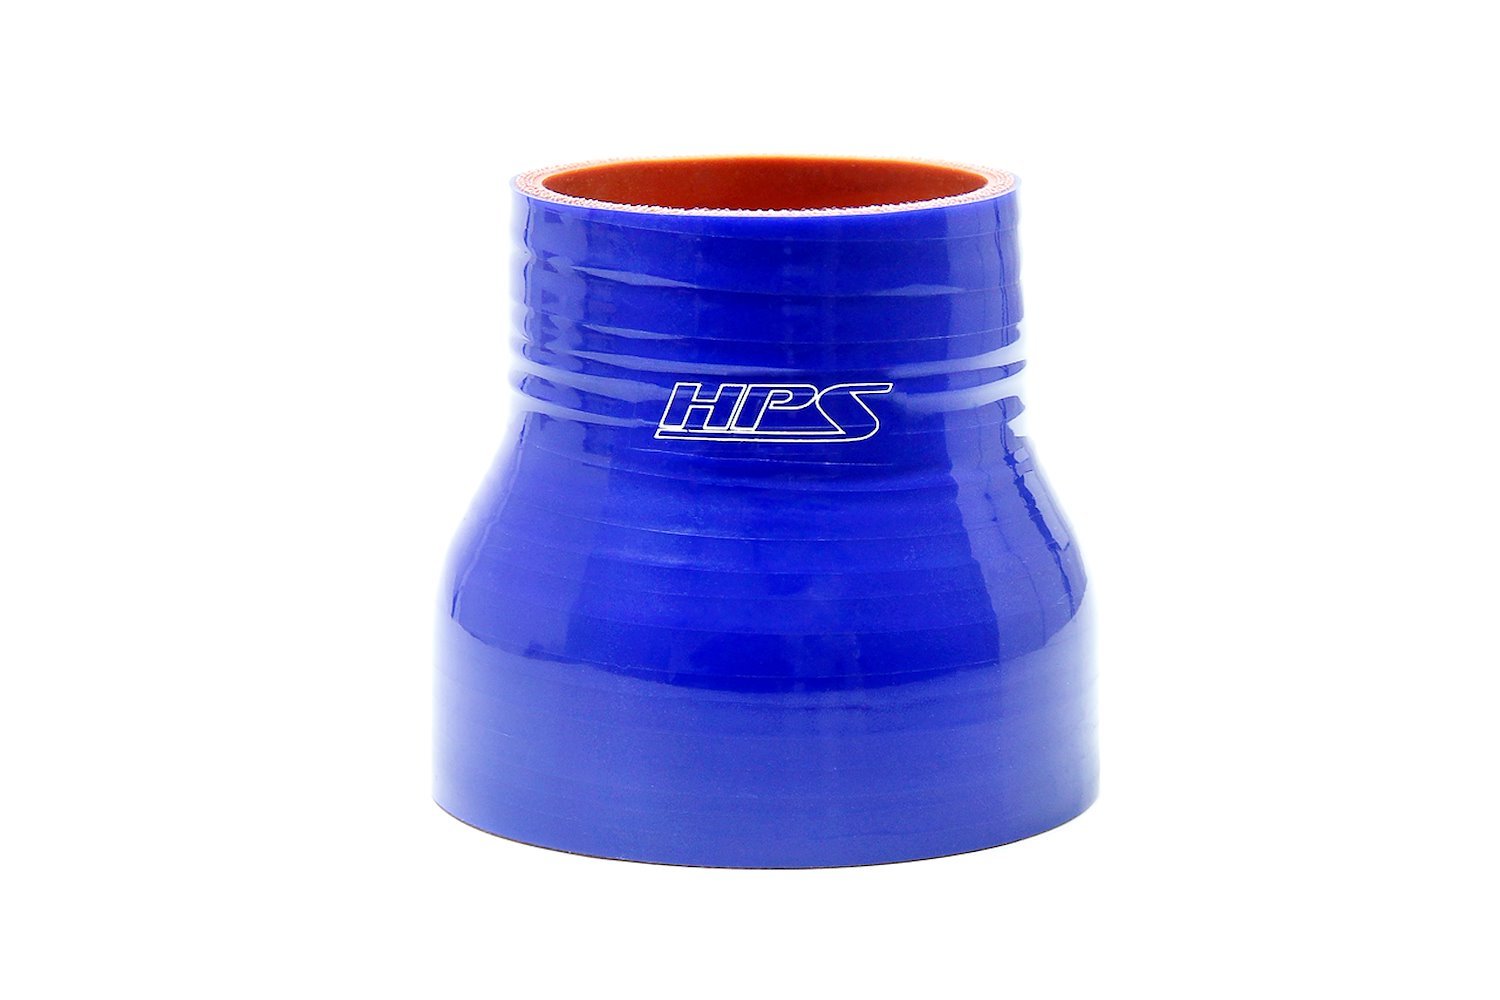 HTSR-325-350-L6-BLUE Silicone Reducer Hose, High-Temp 4-Ply Reinforced, 3-1/4 in. - 3-1/2 in. ID, 6 in. Long, Blue